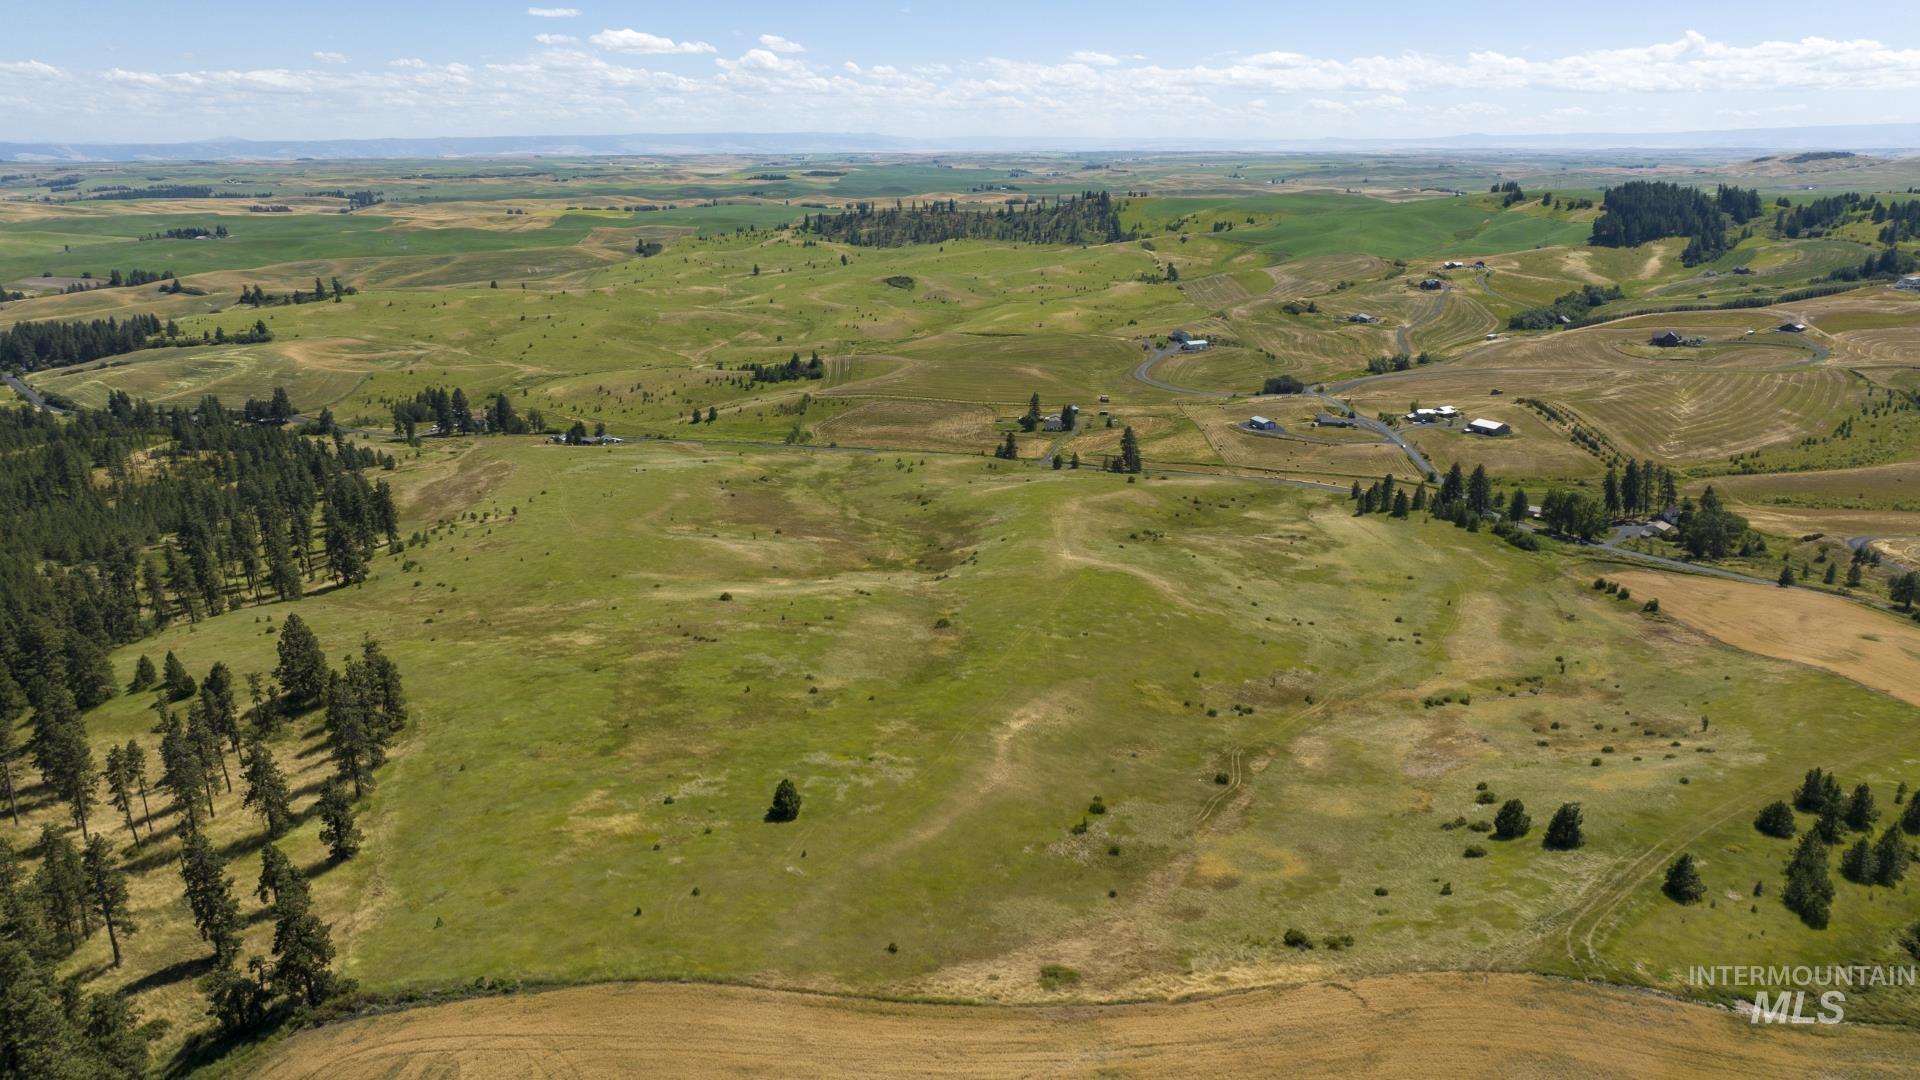 TBD Parcel # 3 Lenville, Moscow, Idaho 83843, Land For Sale, Price $553,350,MLS 98906679